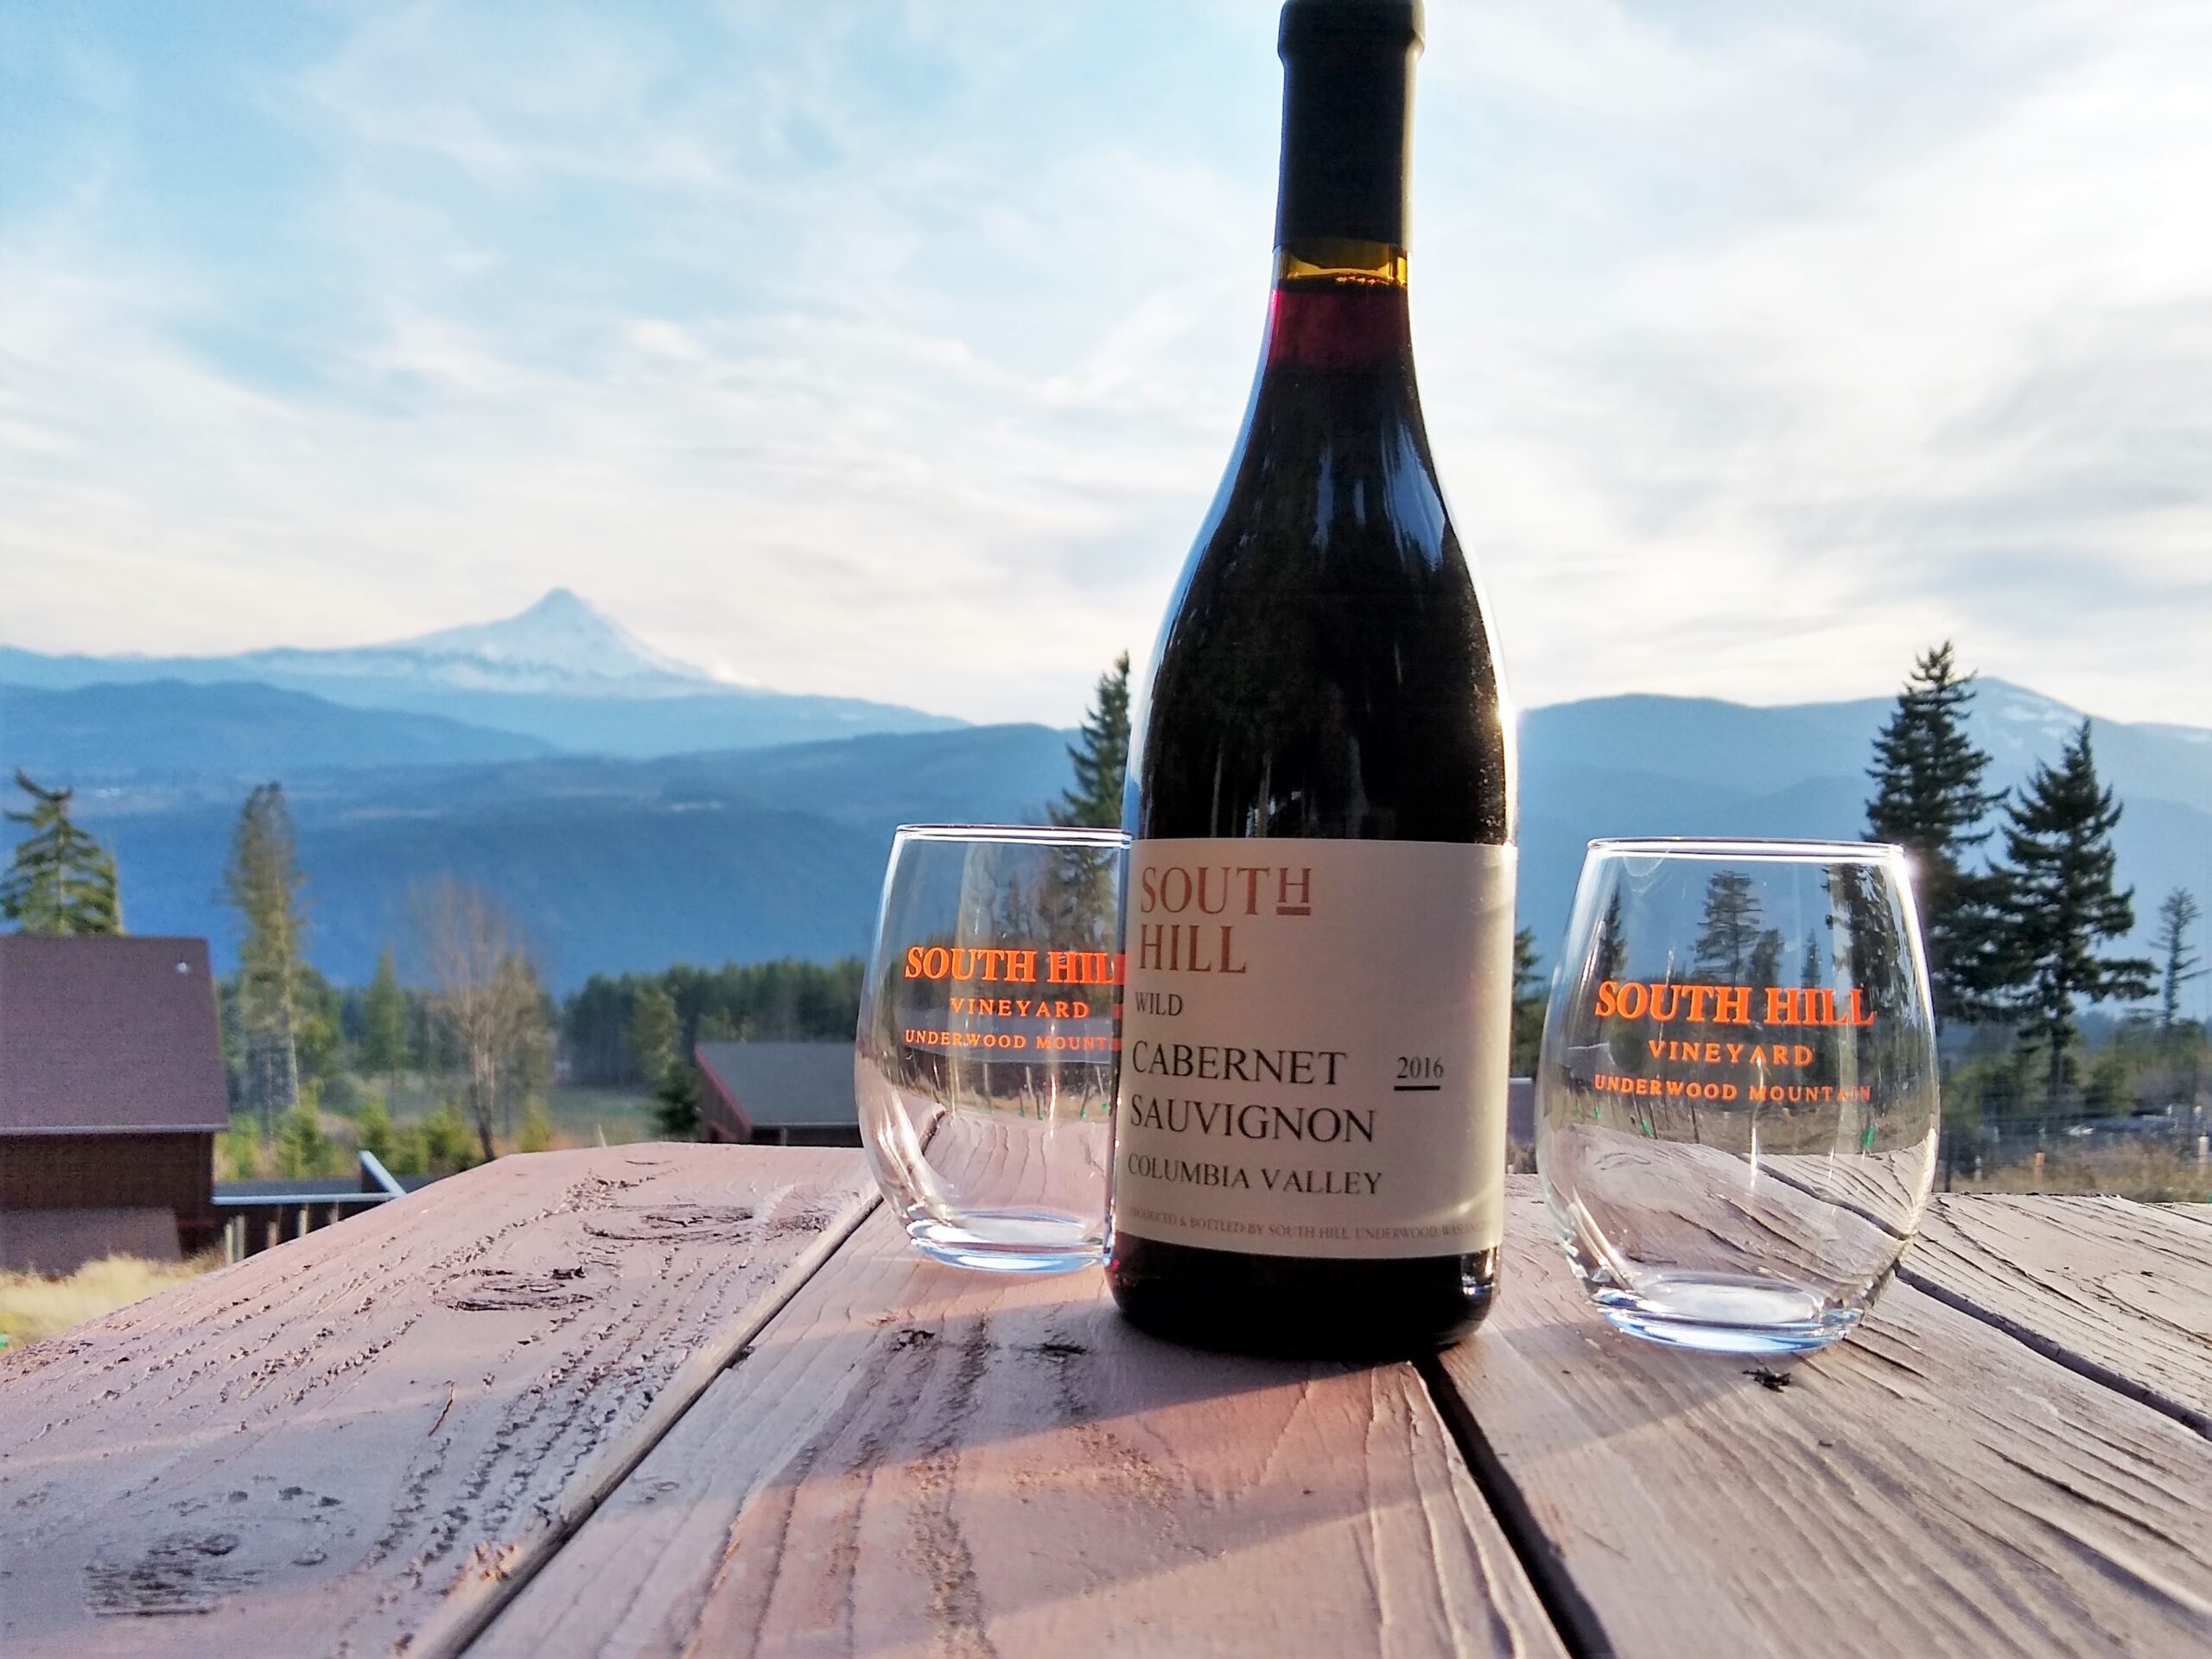 Bottle and two glasses of South Hill wine on top of a picnic table with a view of Mt. Hood beyond